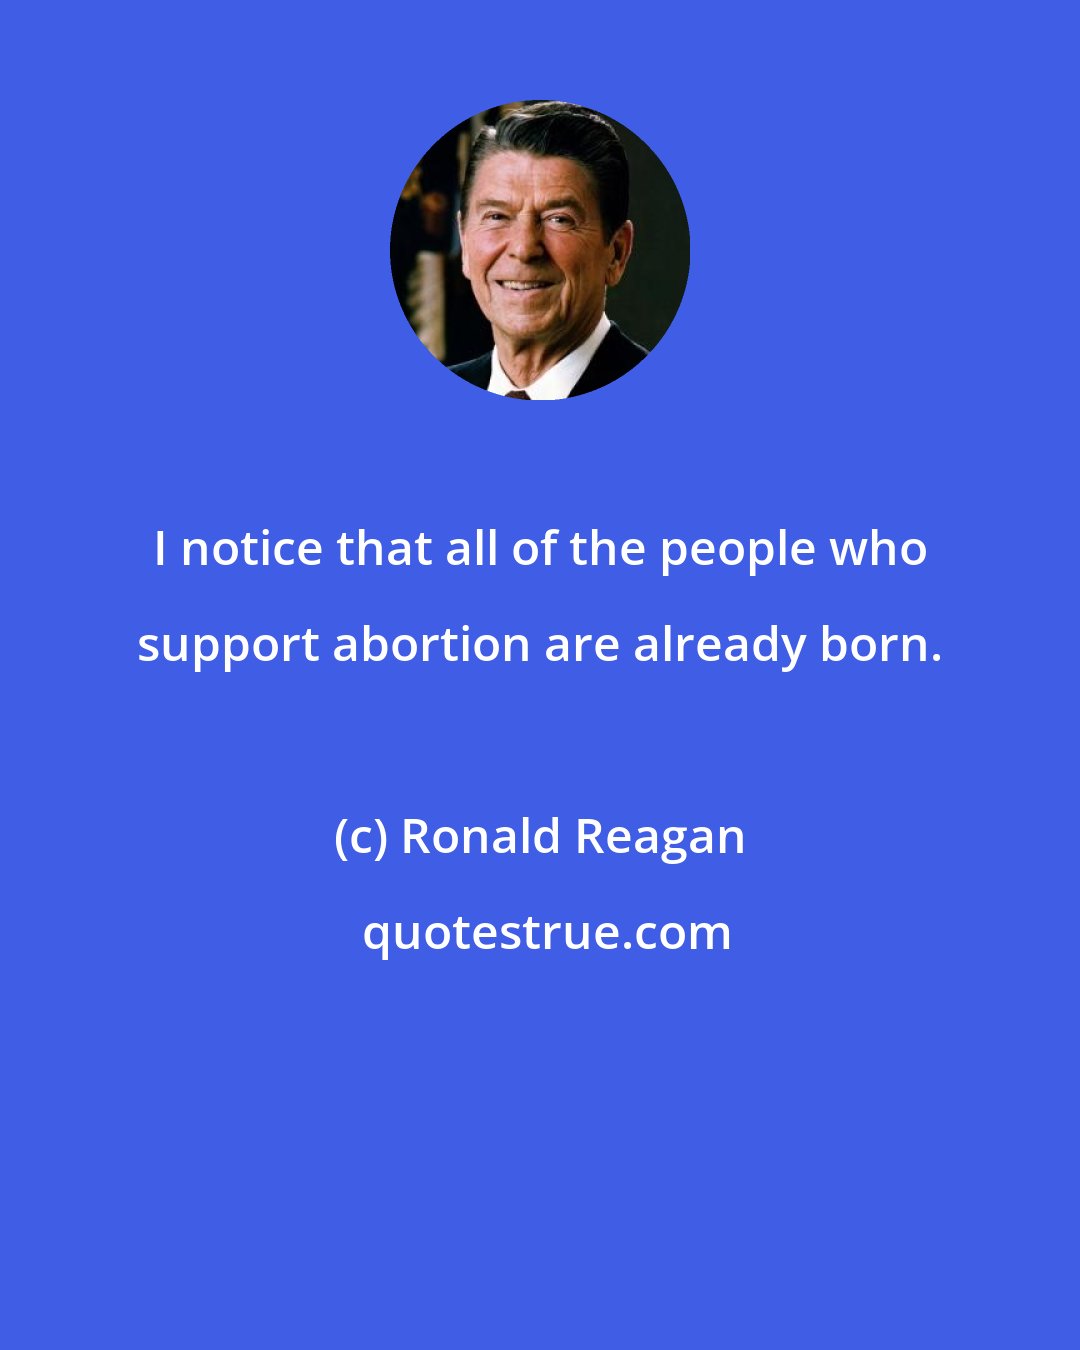 Ronald Reagan: I notice that all of the people who support abortion are already born.